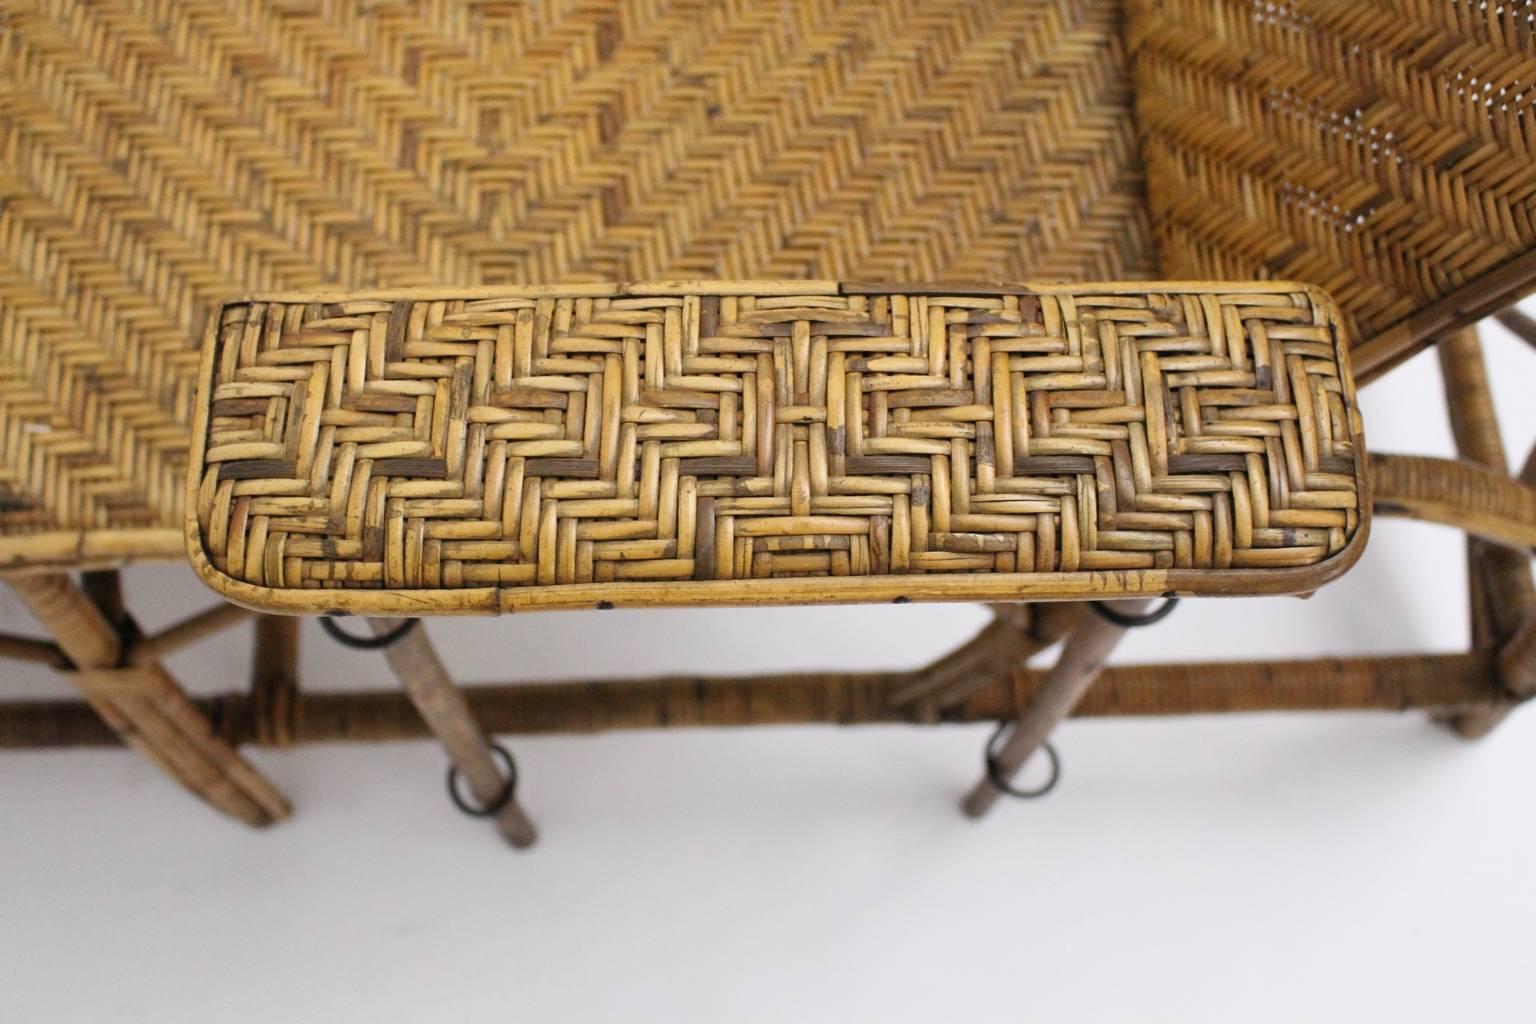 Rattan Art Deco Vintage Chaise Longue by Perret & Vibert Attributed France 1920s For Sale 10